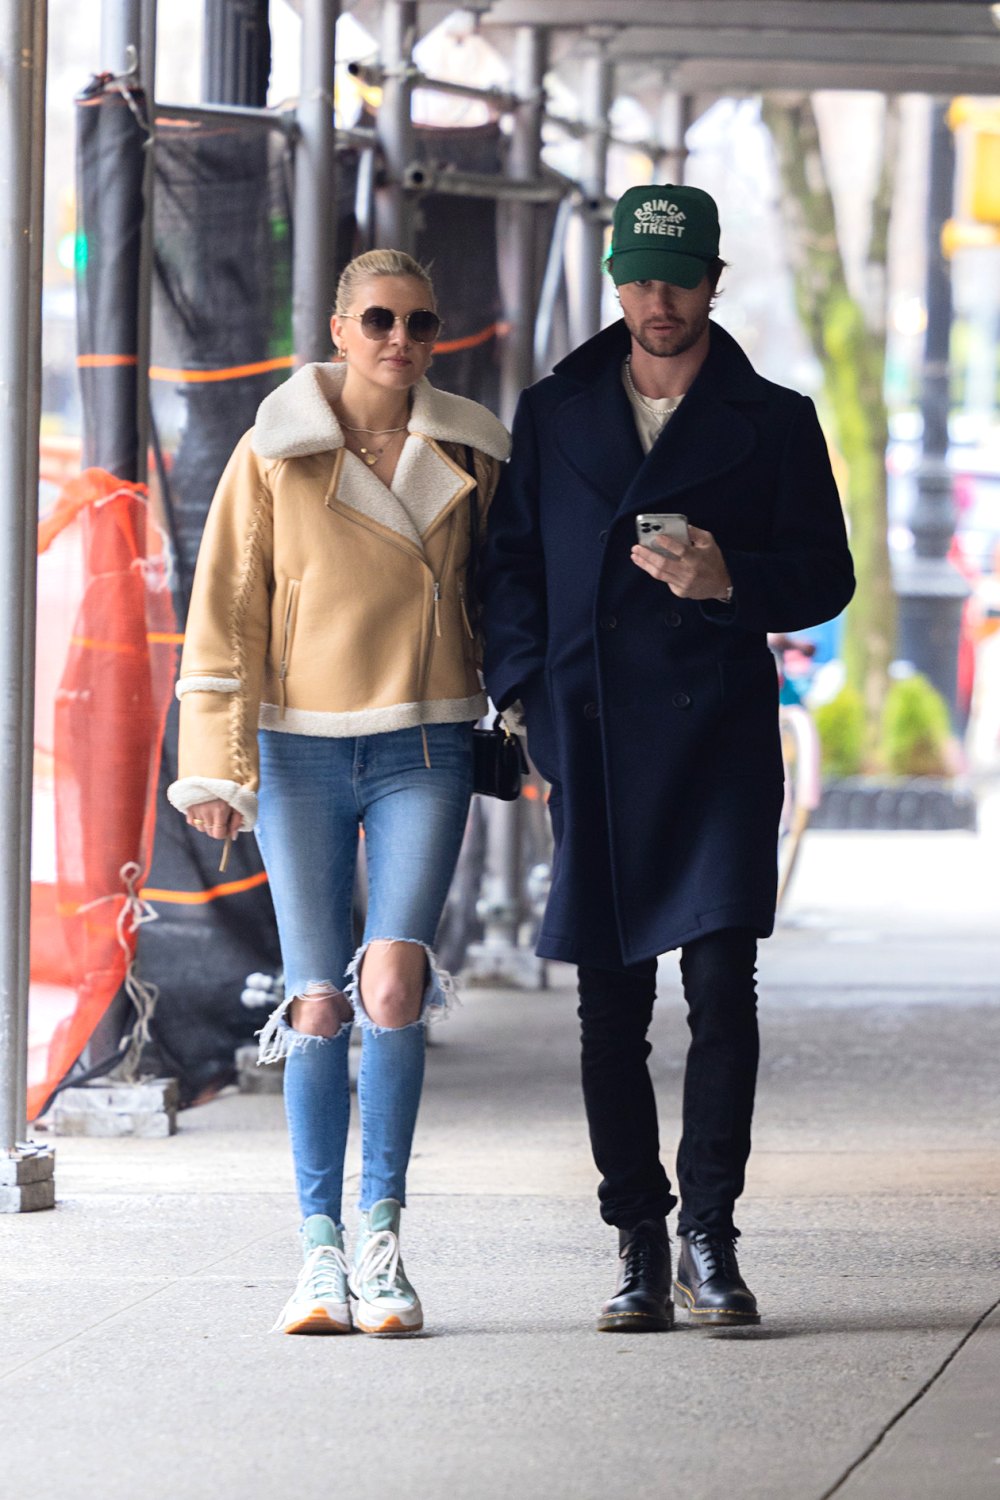 Kelsea Ballerini Packs on PDA With Chase Stokes In NYC Before Her 'SNL' Debut: Photos